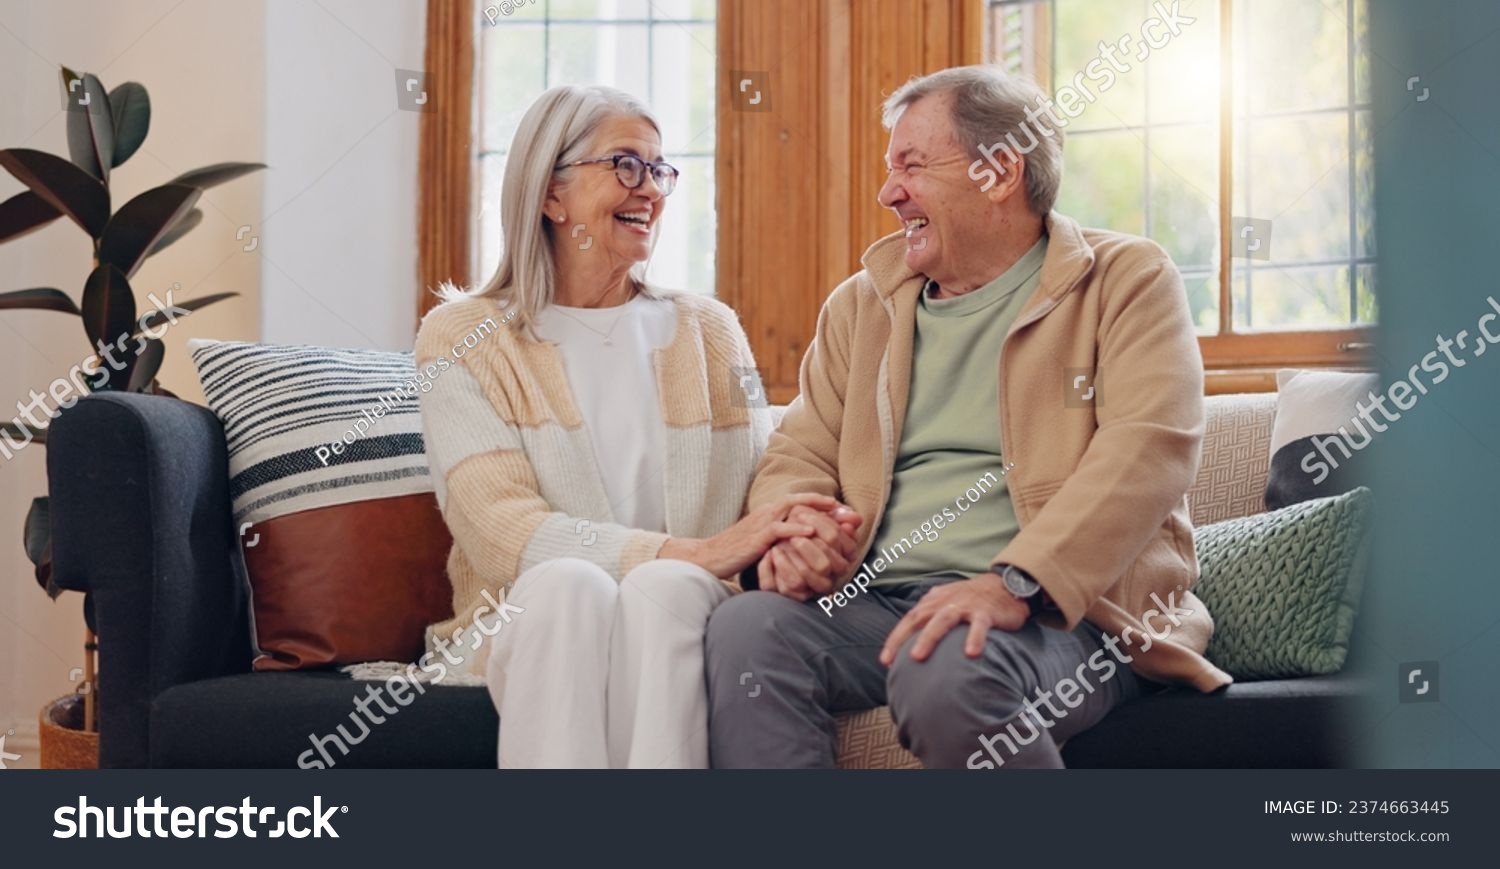 Love, relax and senior couple laughing at funny joke, enjoy quality time together and bond on home living room sofa. Retirement, smile and elderly man, woman or people happy #2374663445